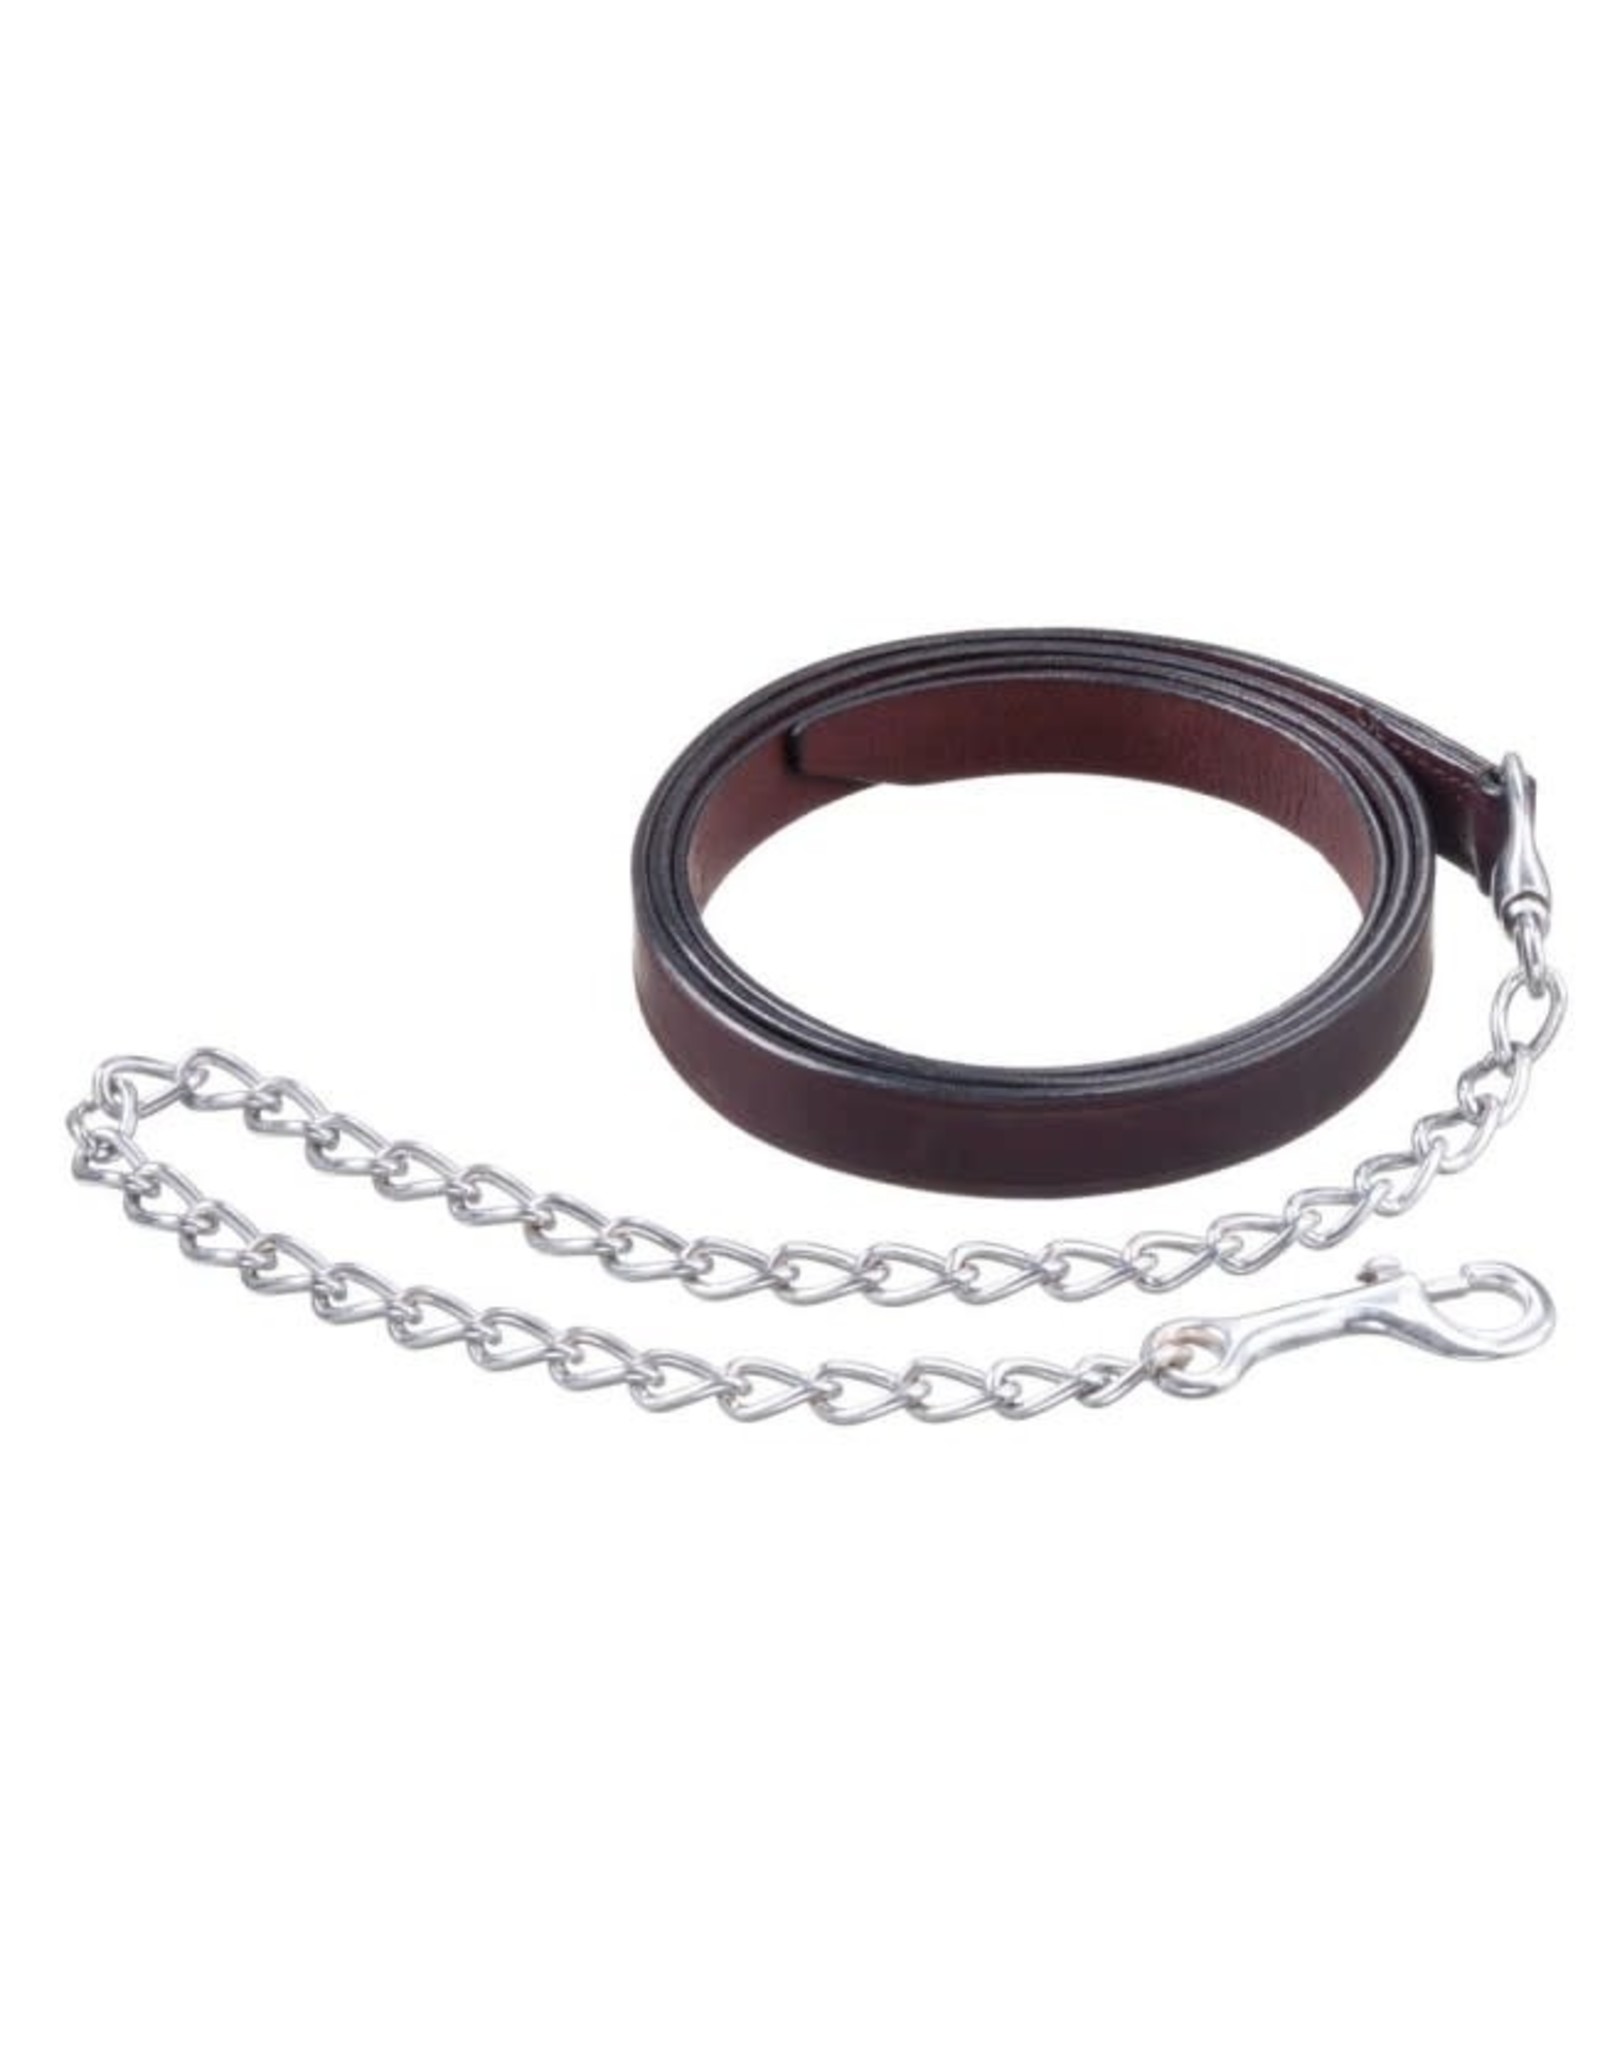 Royal King Leather Lead with Chain Dark Oil 1" Nickel